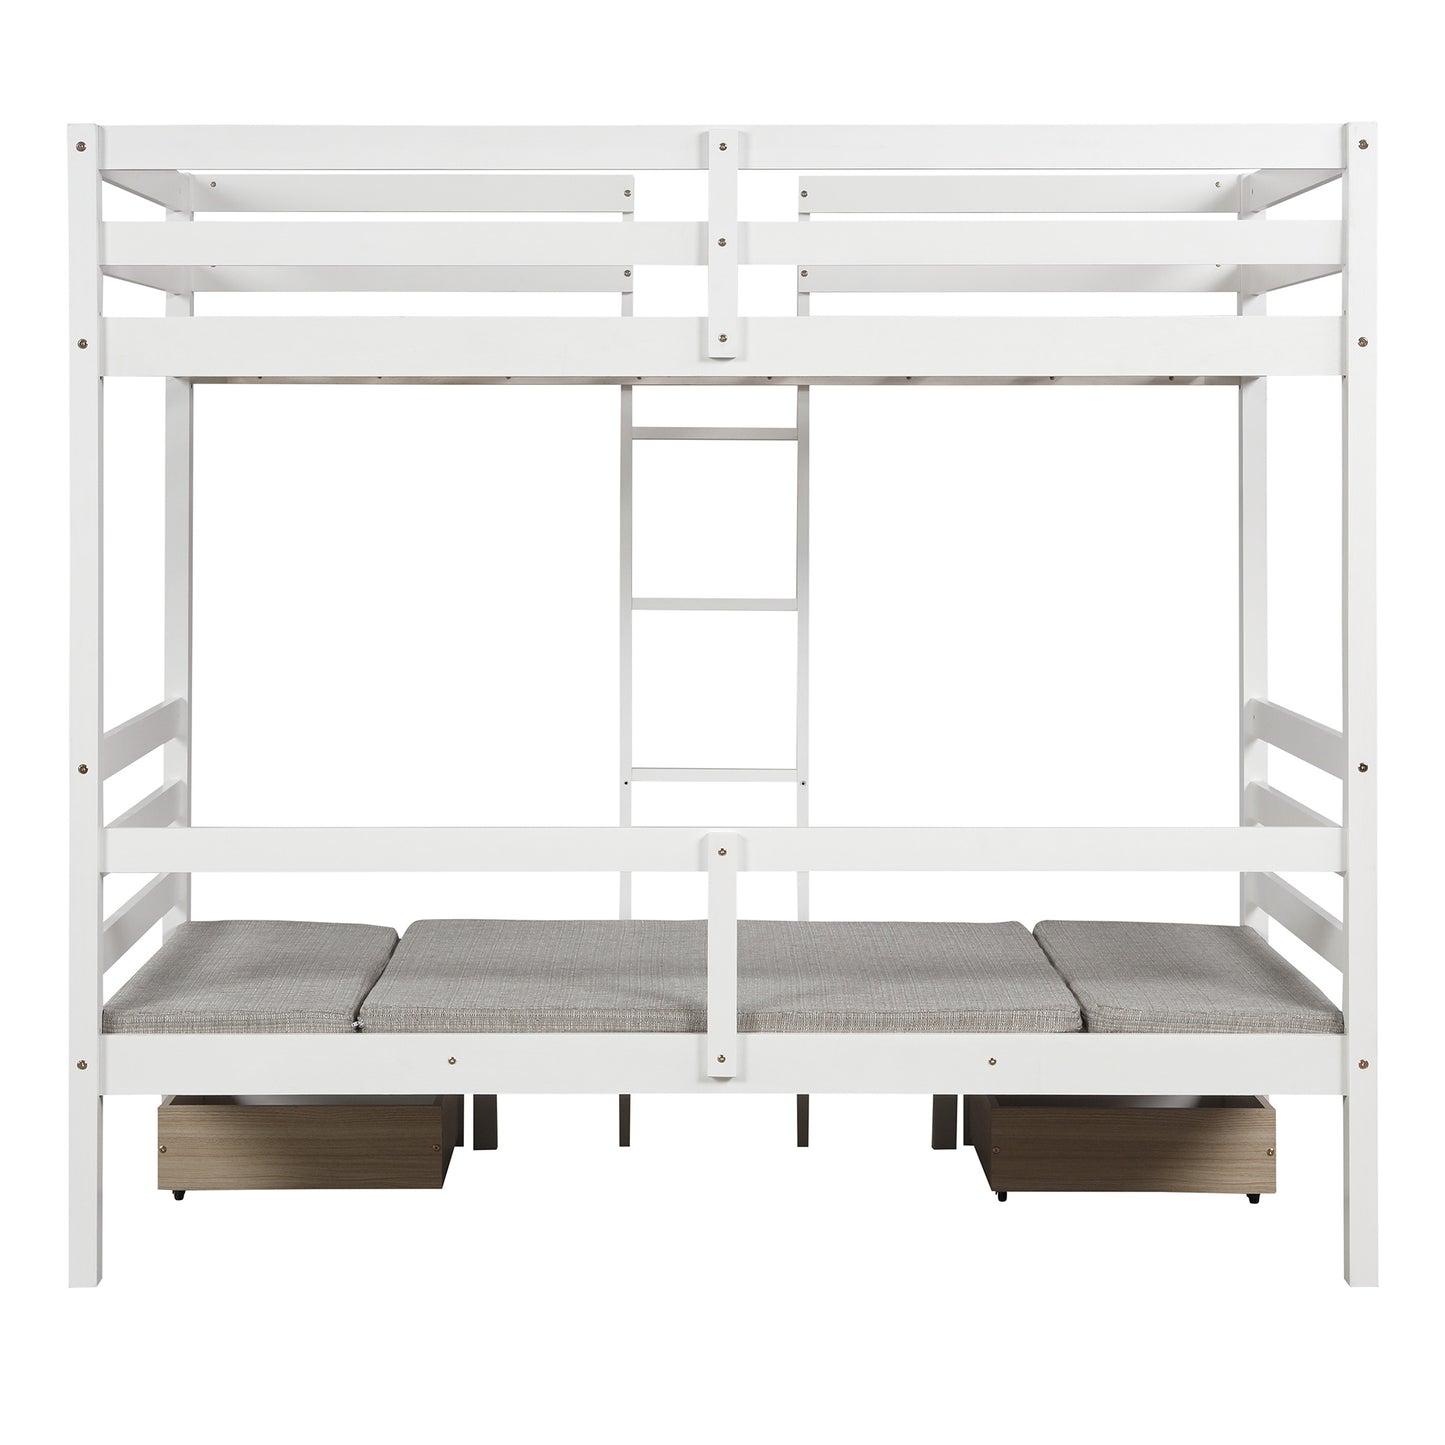 functional loft bed twin size,white